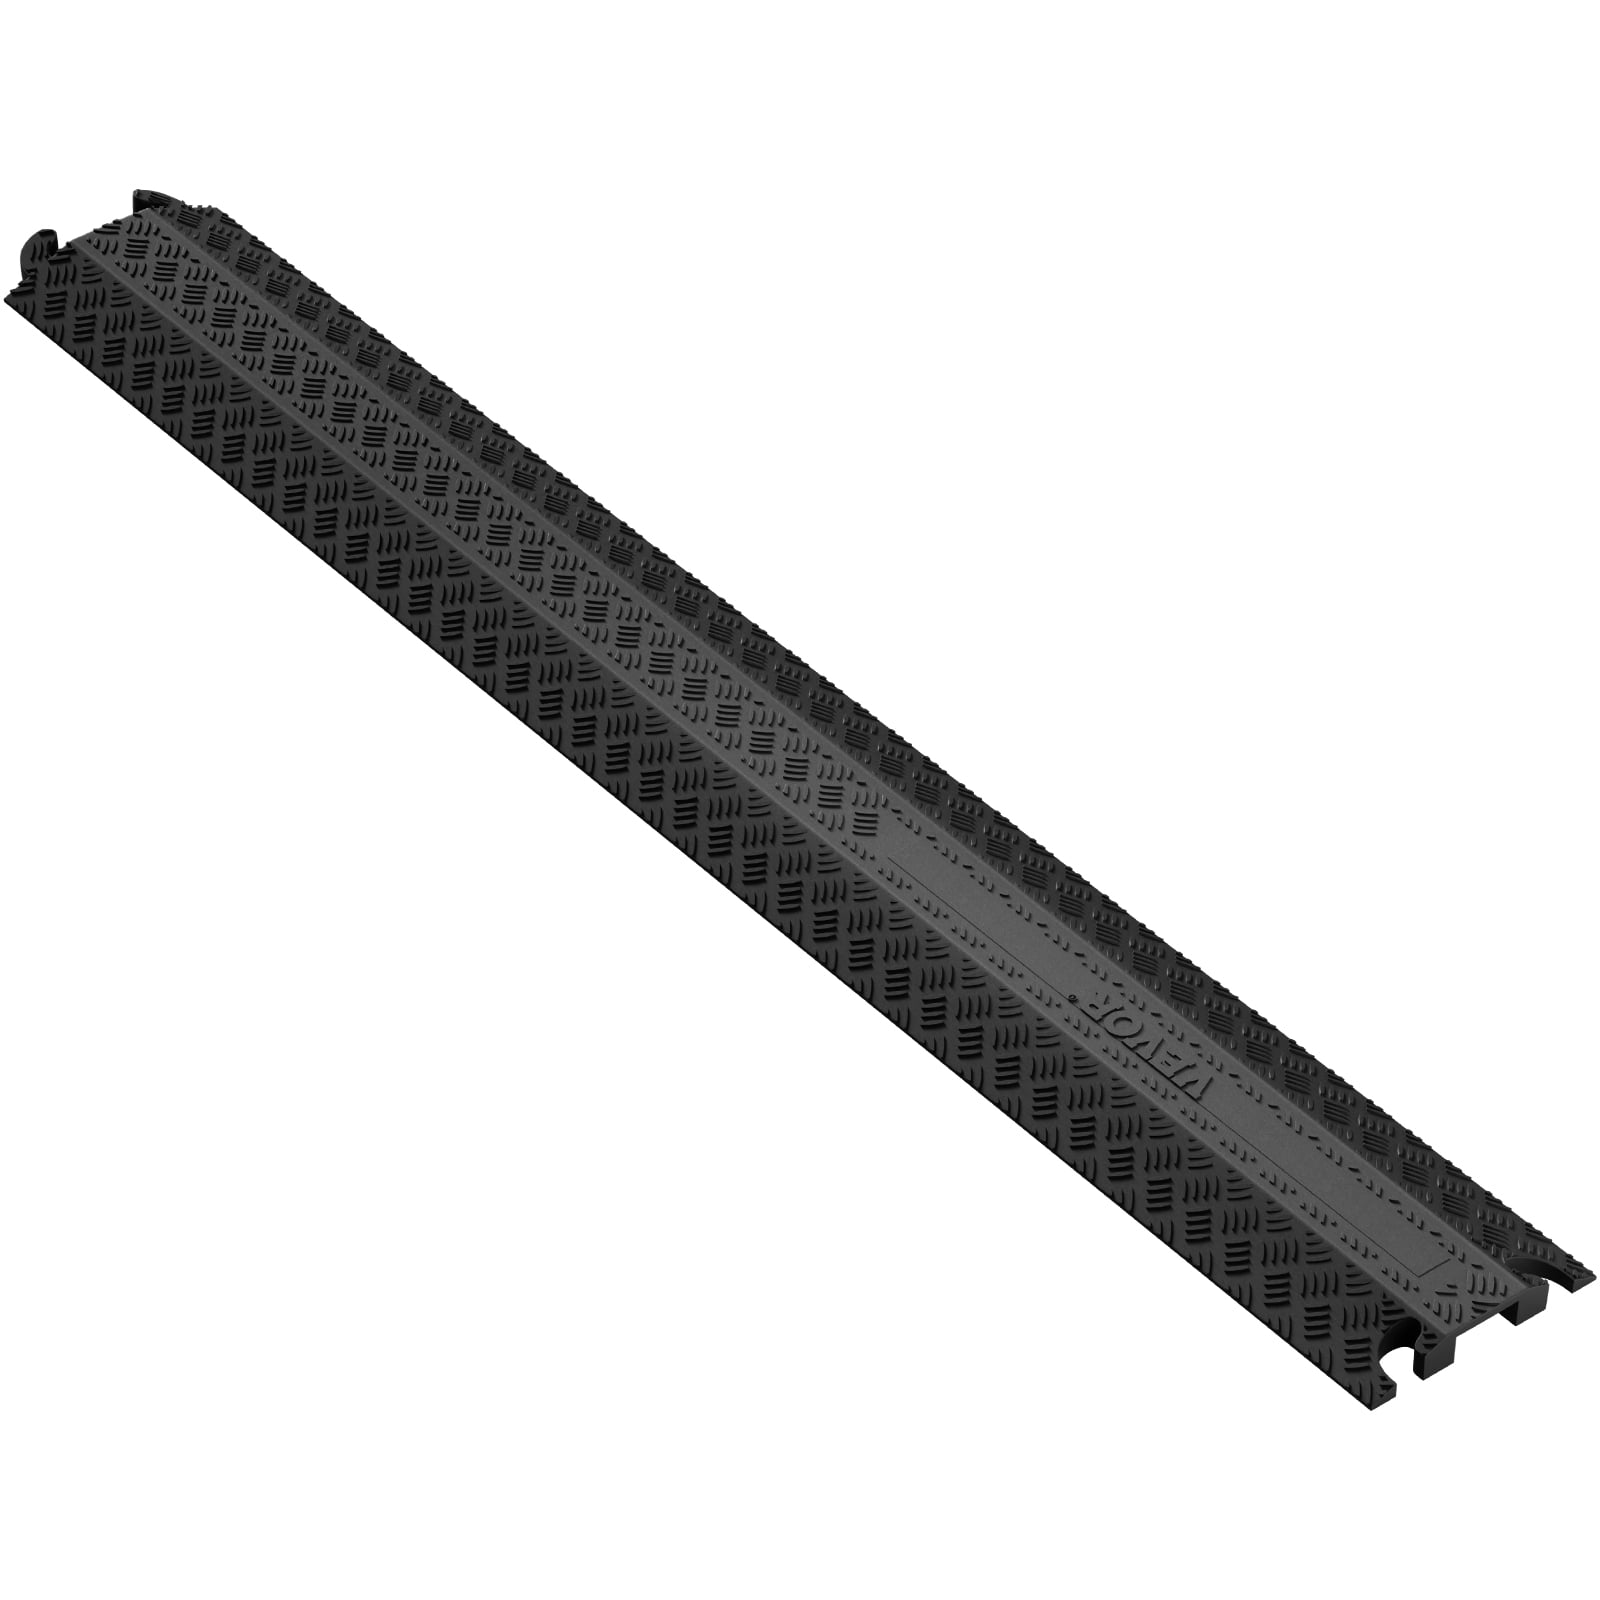 Pyle Durable Cable Protection Ramp Cover - Supports 11000lbs Single Channel  Heavy Duty Hose and Cord Track Floor Protection, 39.4” x 5.11” x 0.78”